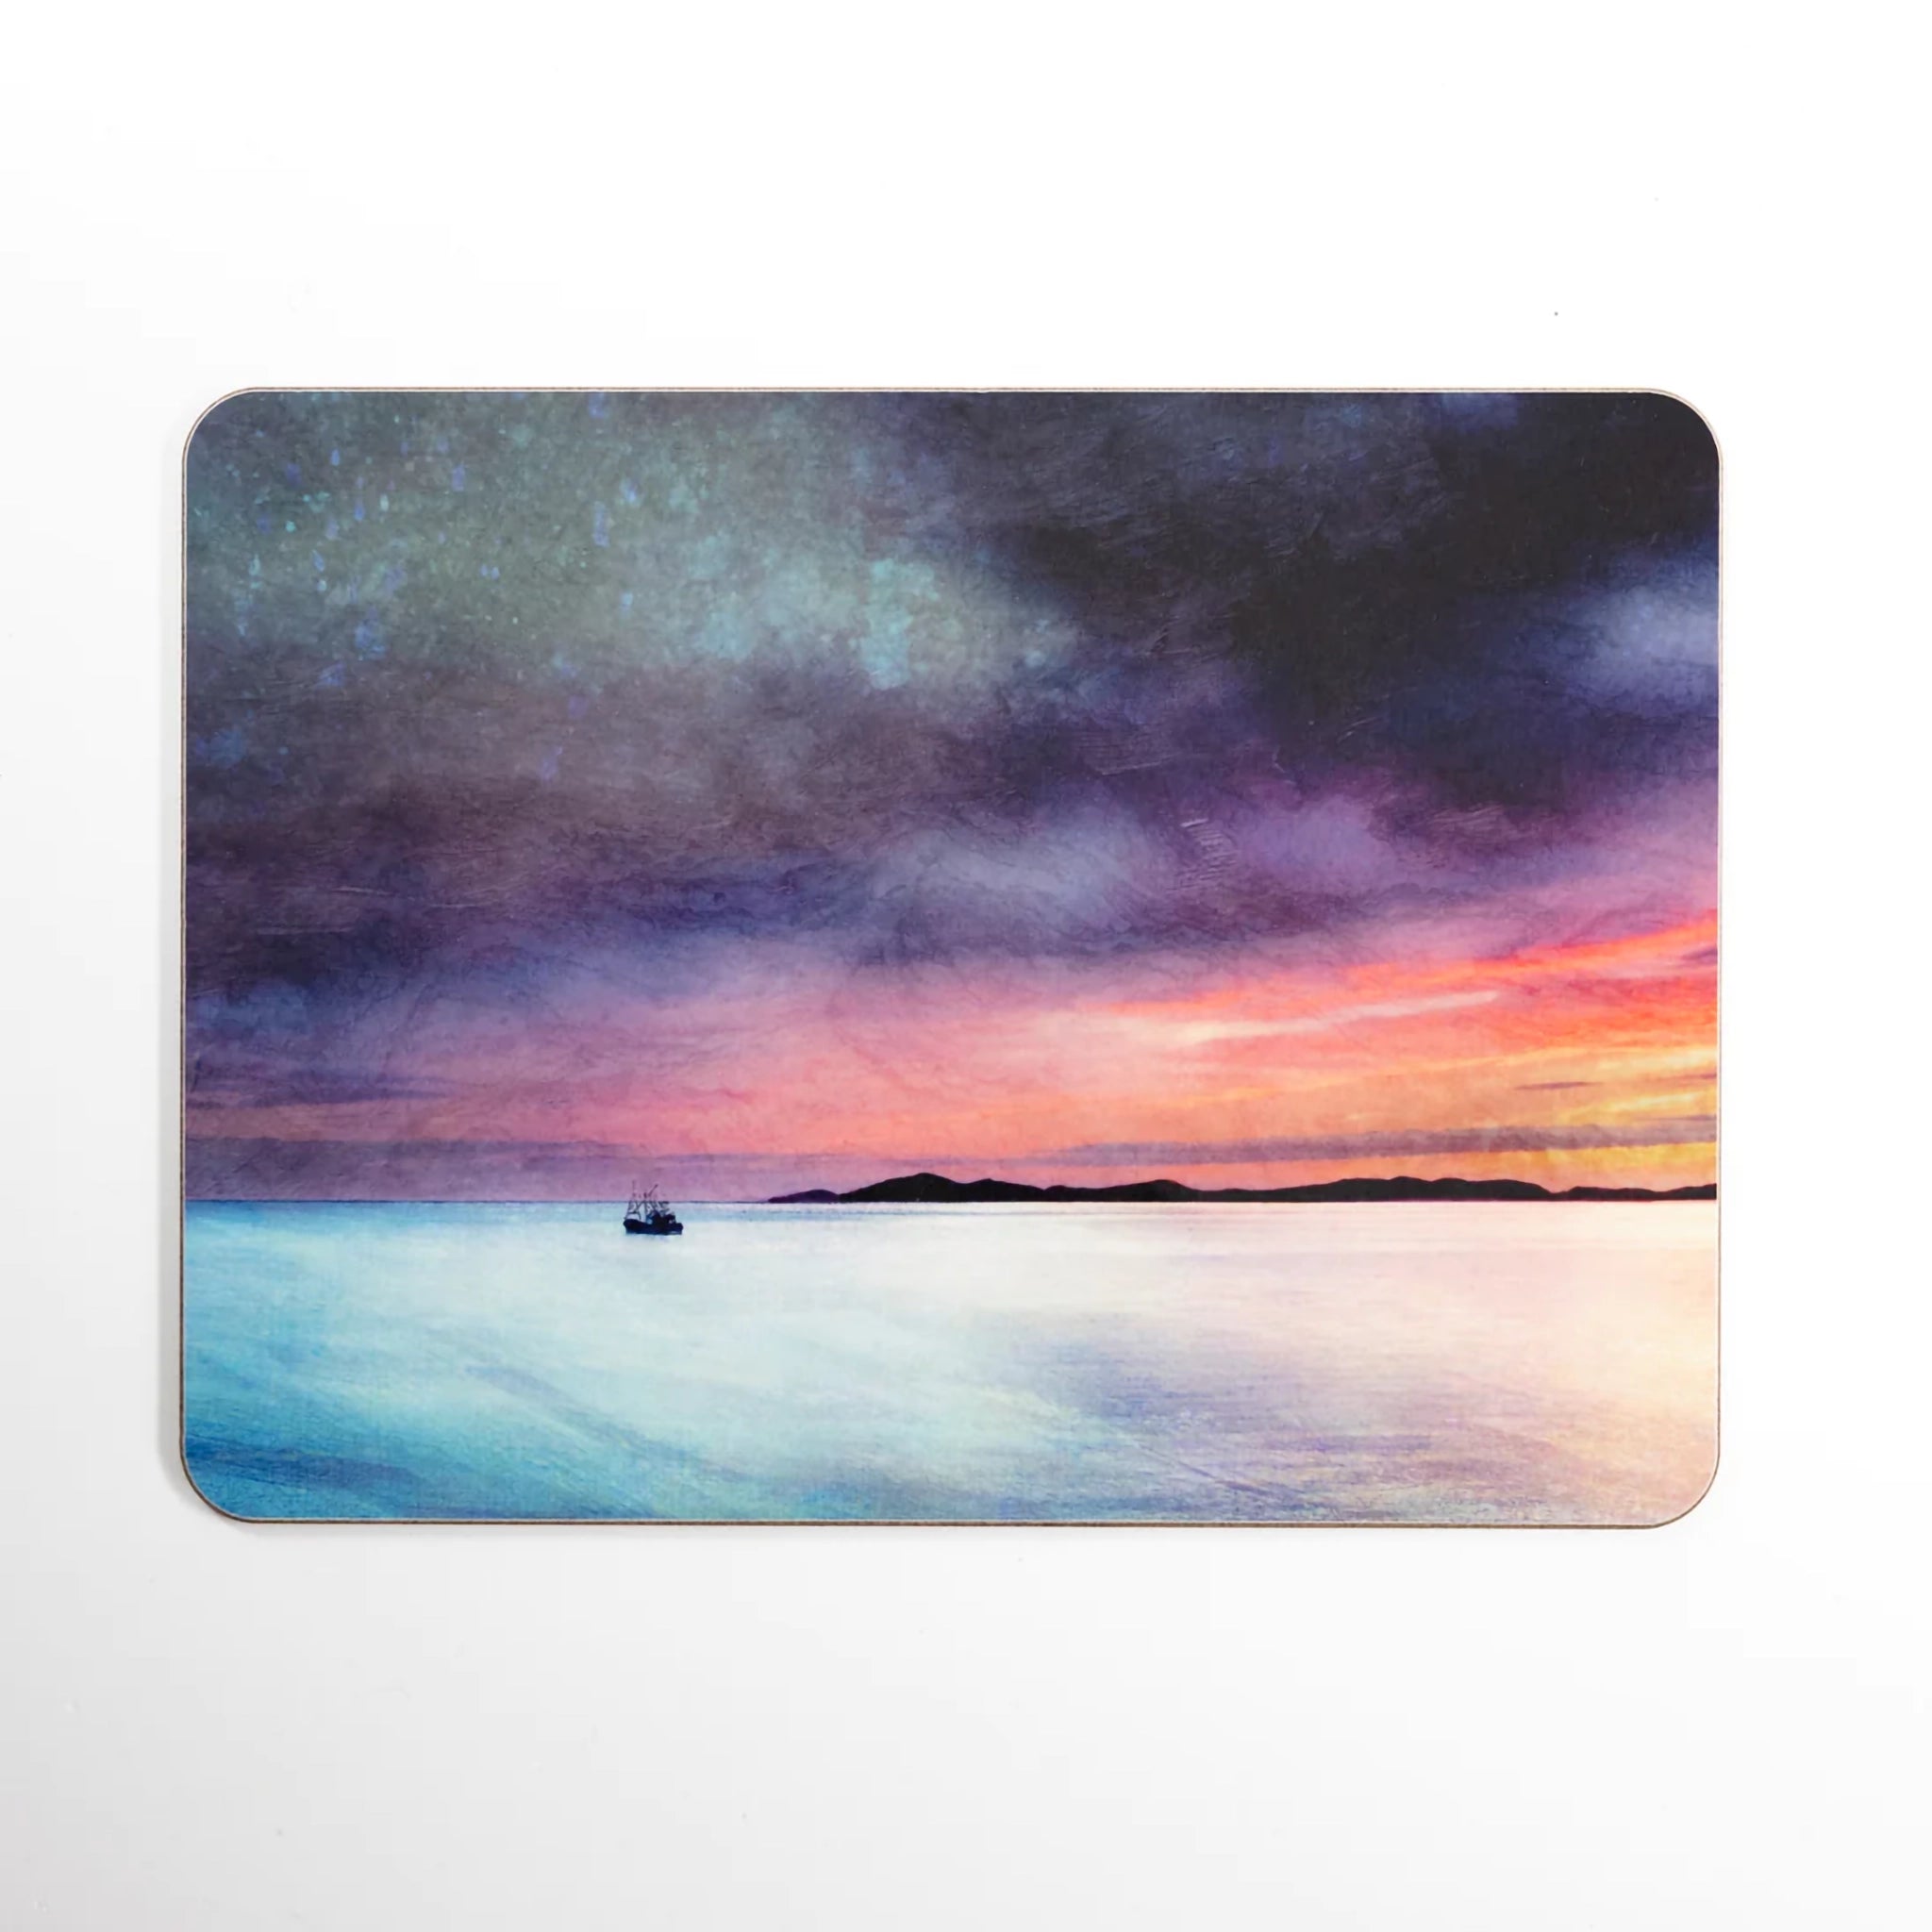 A melamine placemat featuring a waterscape artwork by Cath Waters in pinks, purples and blues